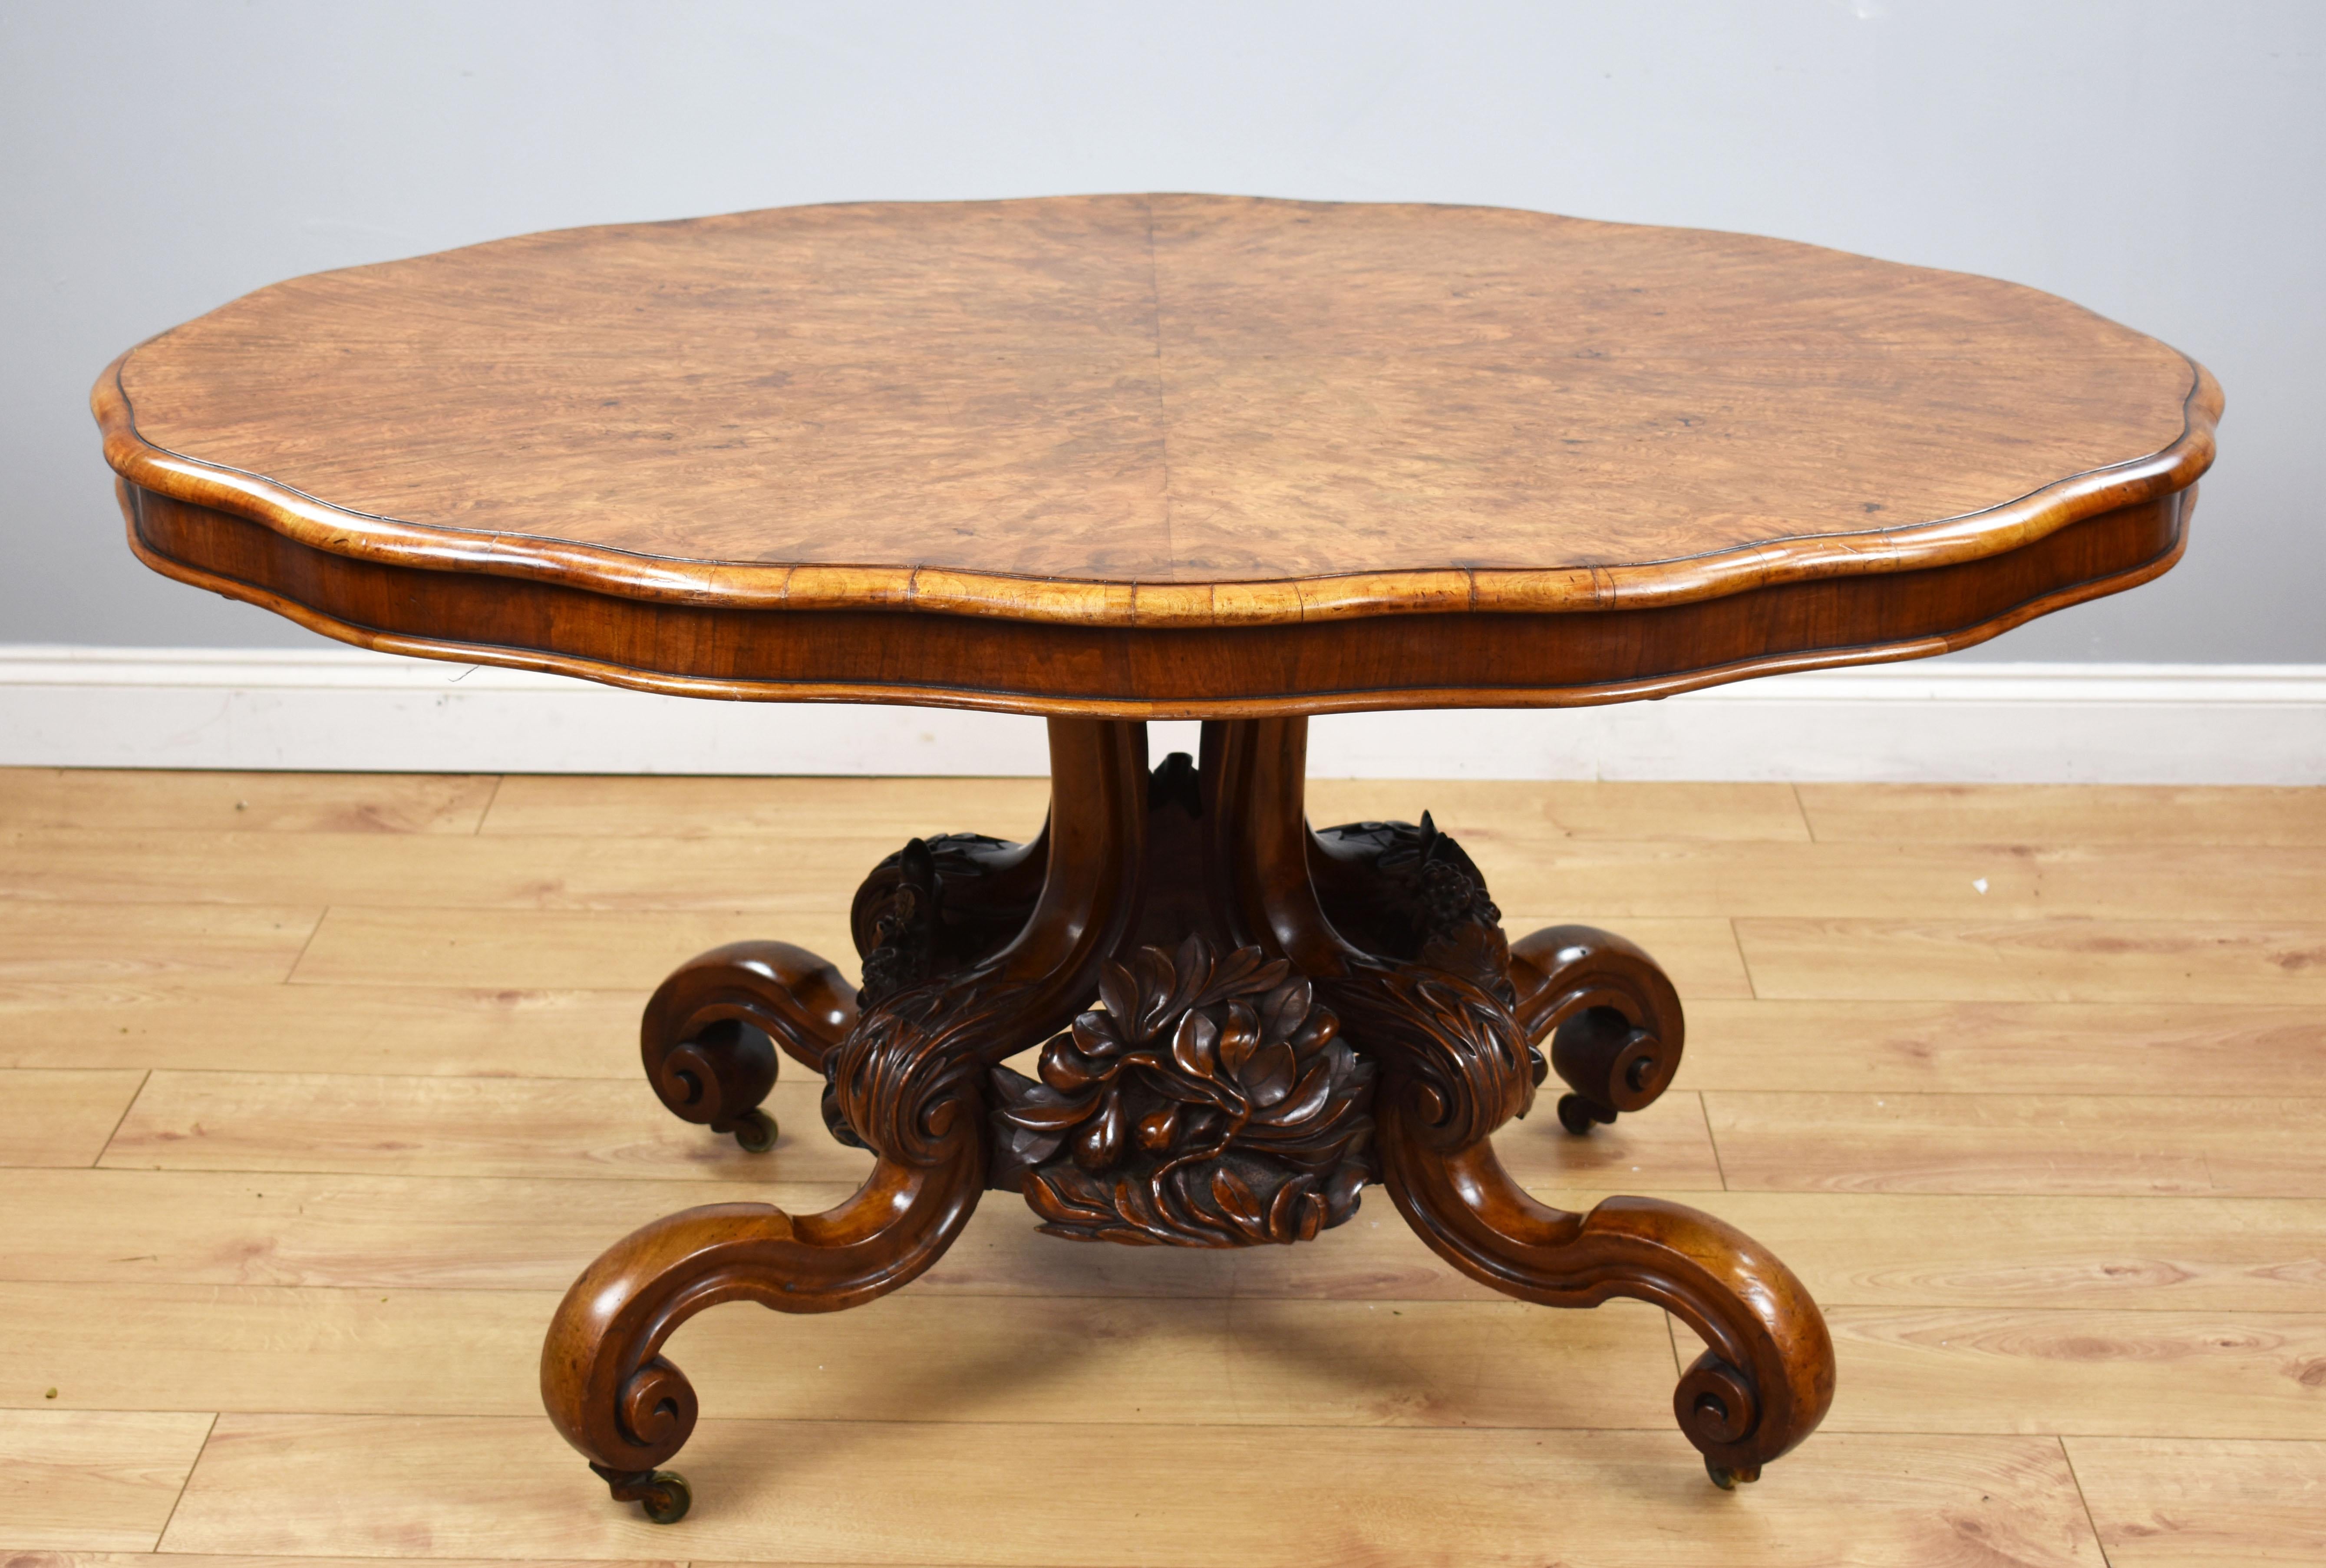 A top quality Victorian burr walnut loo table, having a well figured top, above a superbly carved base, with fruiting vine and oak leaf decoration, terminating on scroll feet raised on original castors. The table remains in very good condition,